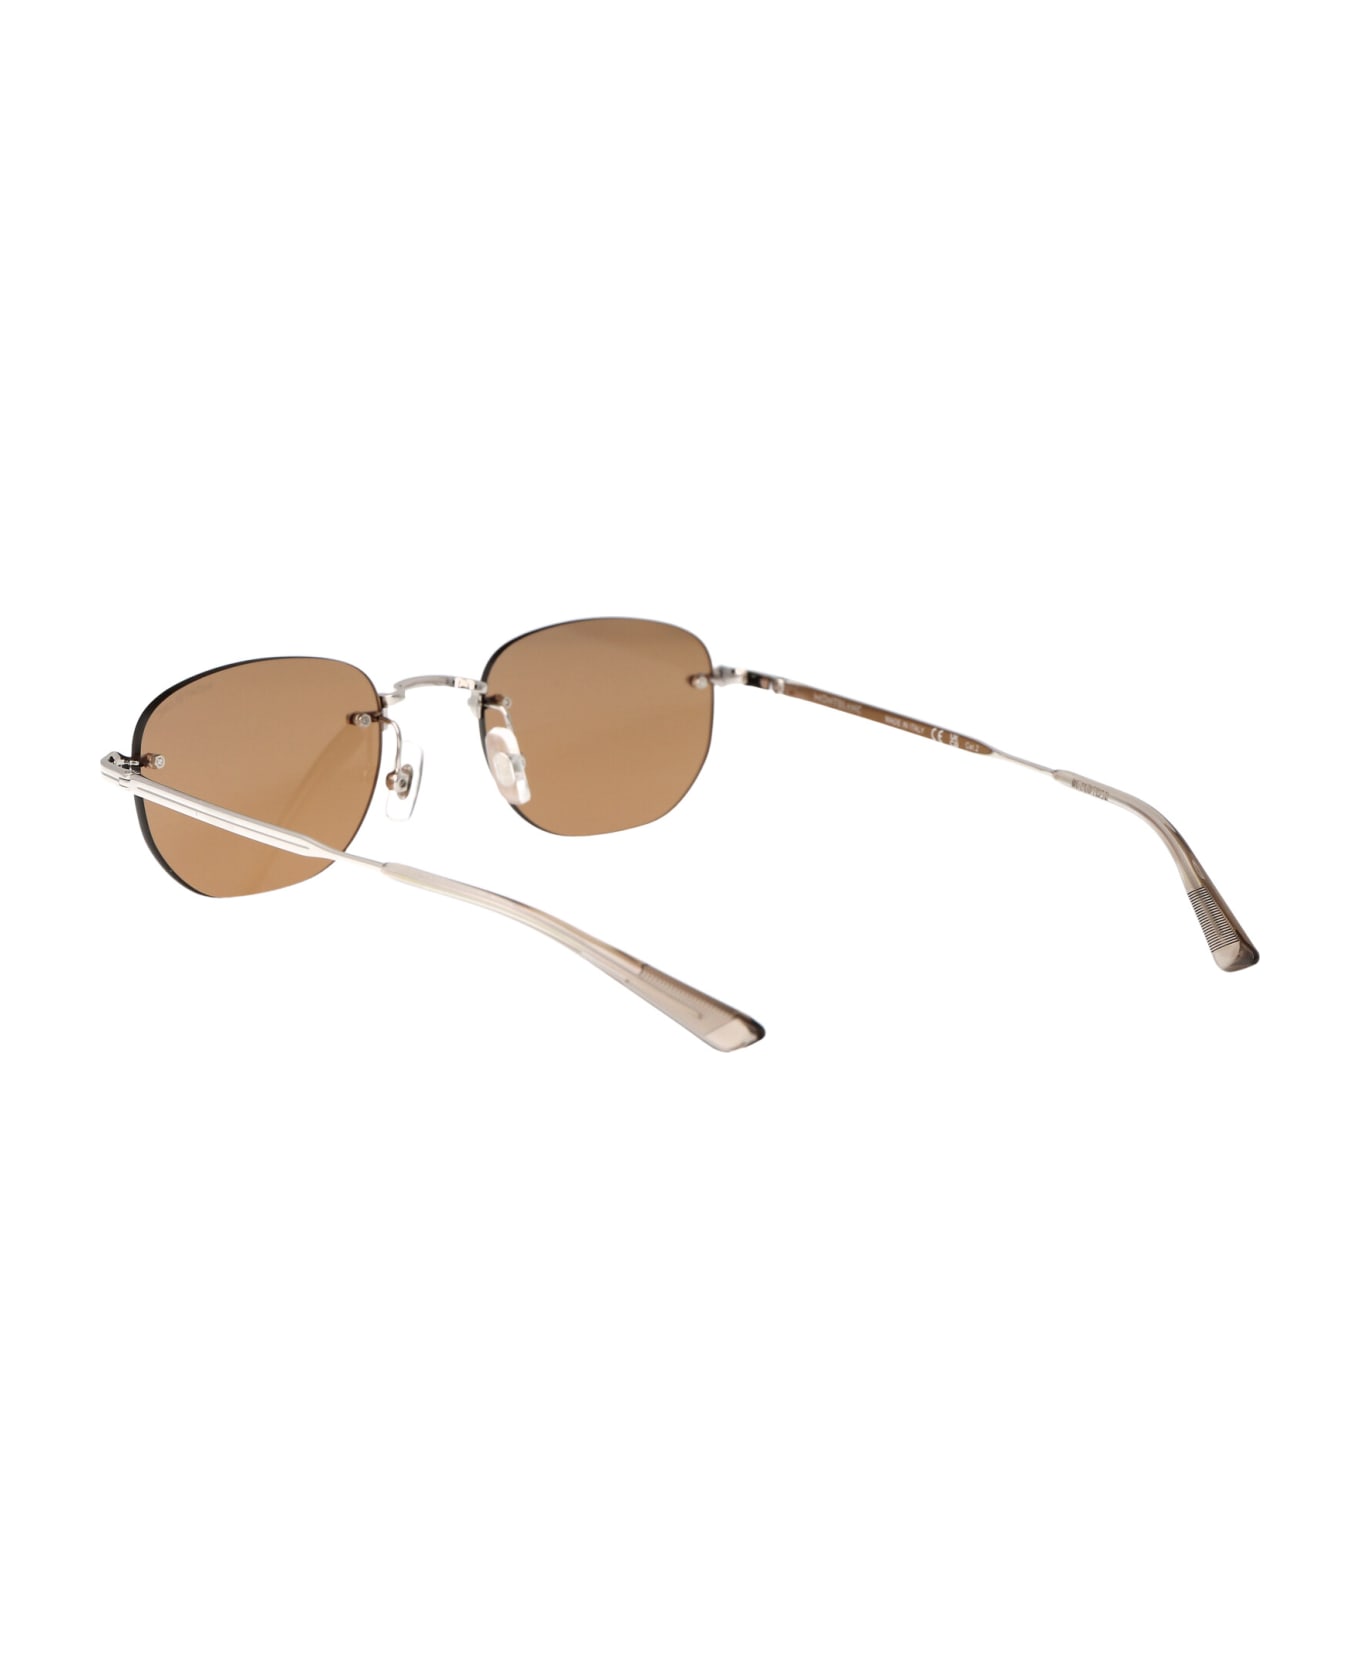 Montblanc Mb0303s Sunglasses - 003 SILVER SILVER BROWN